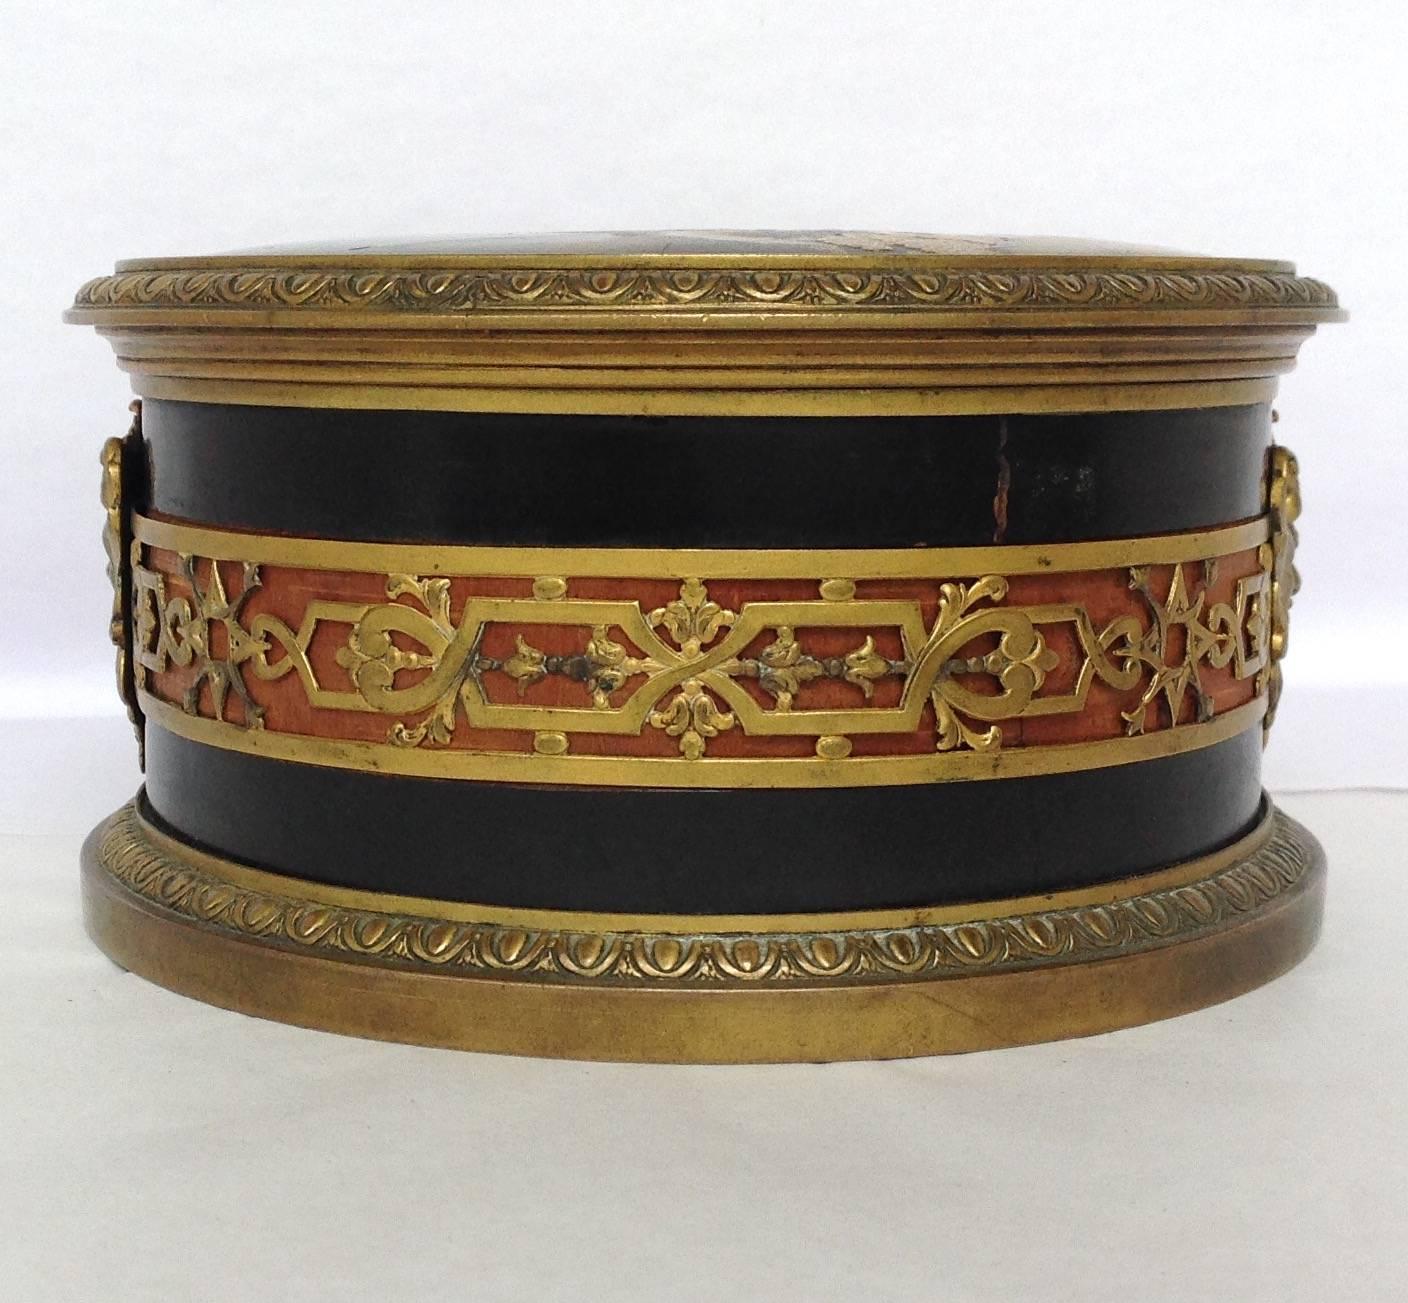 Boin-Taburet French Bronze Box Japanese Lacquer 19th Century For Sale 1